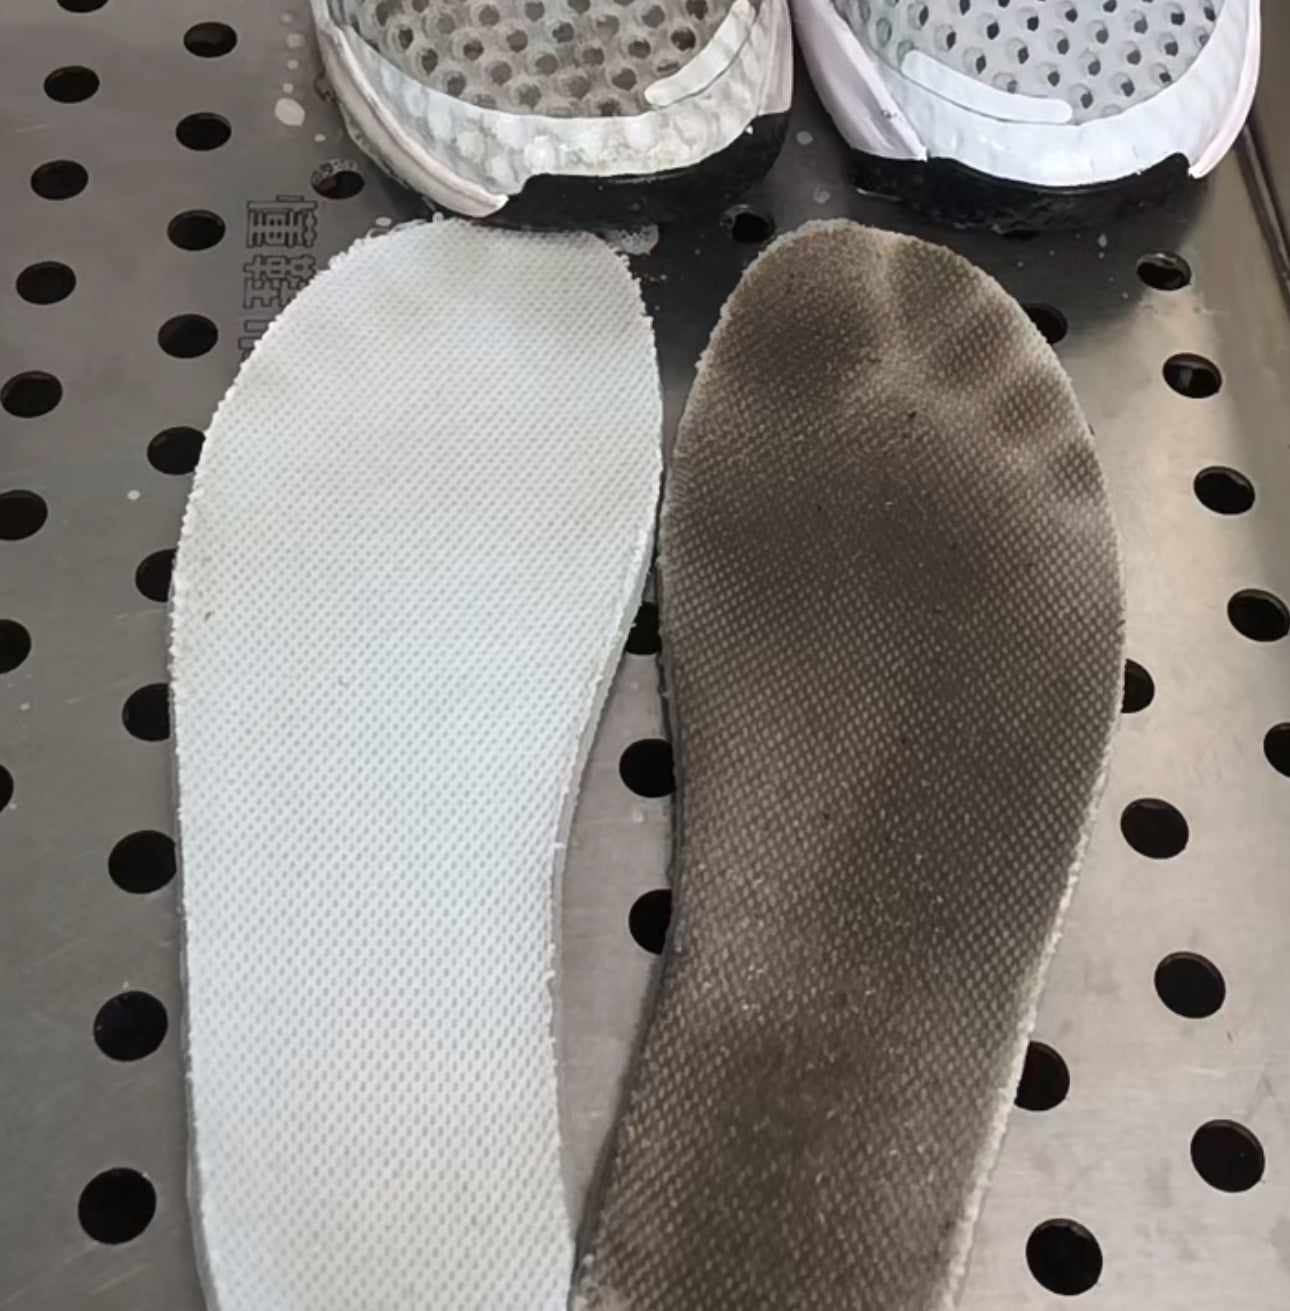 Advanced sneaker cleaning